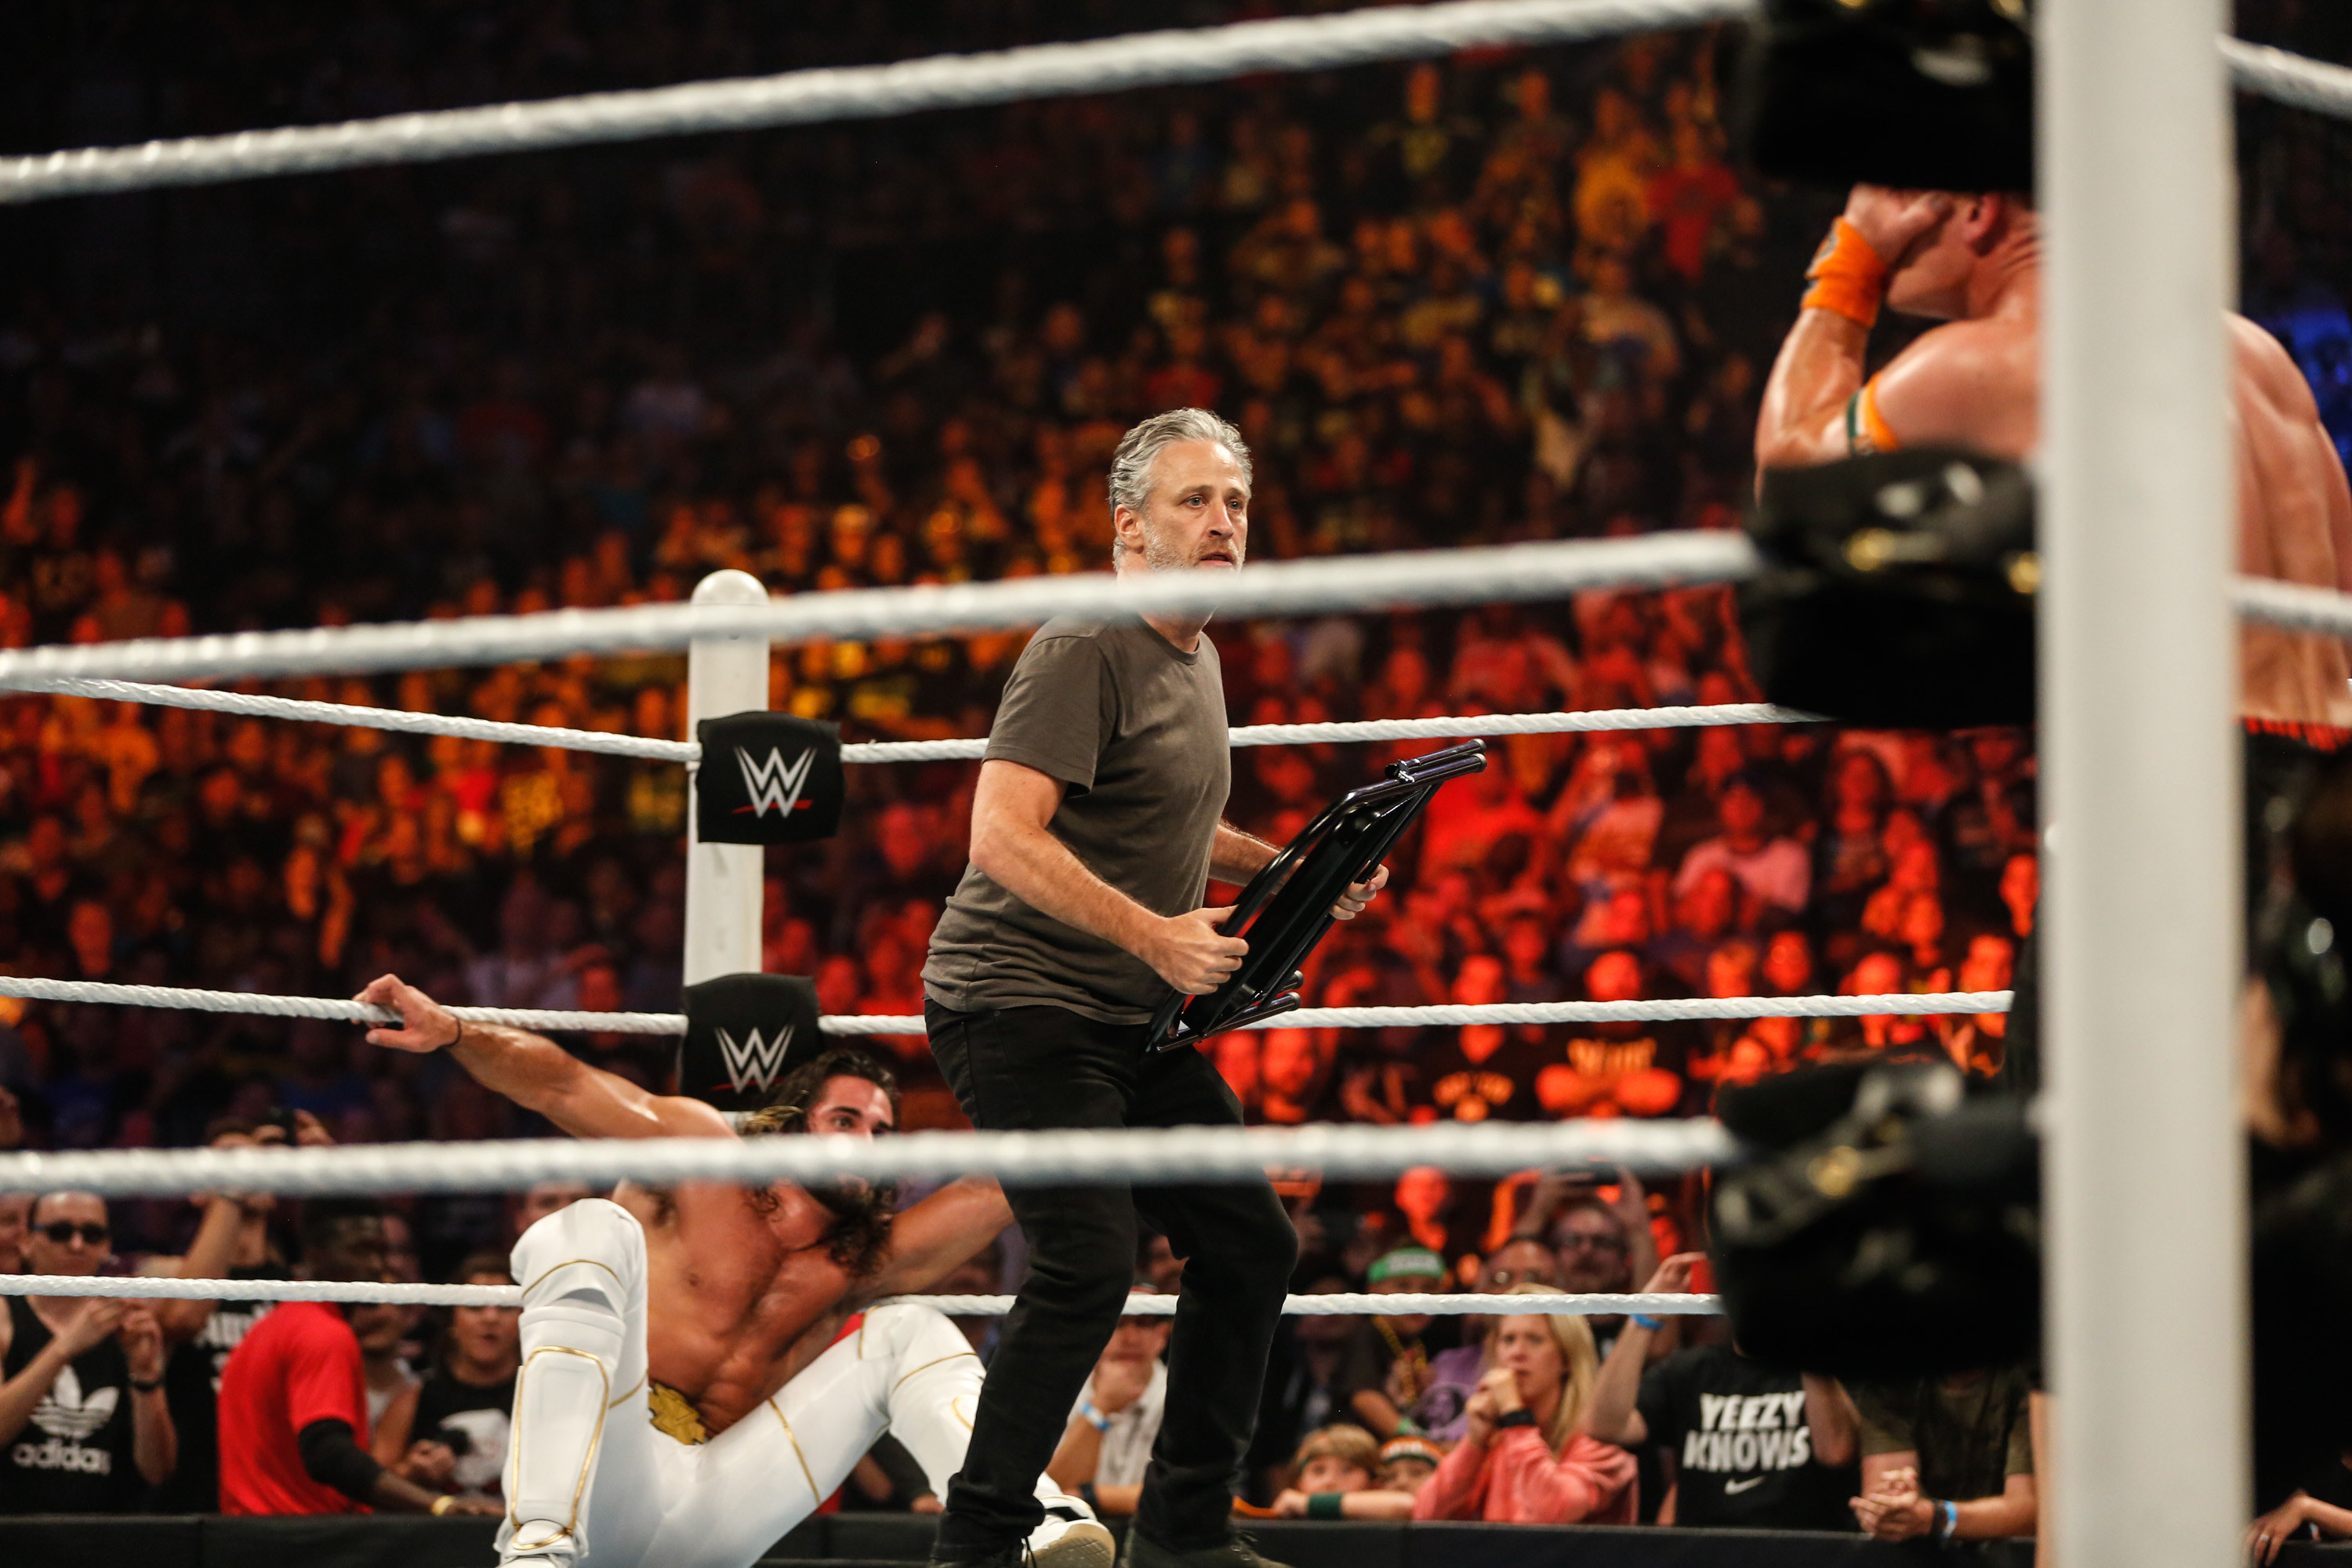 Jon Stewart gets into the action at WWE SummerSlam at the Barclays Center of Brooklyn on August 23, 2015 in New York City